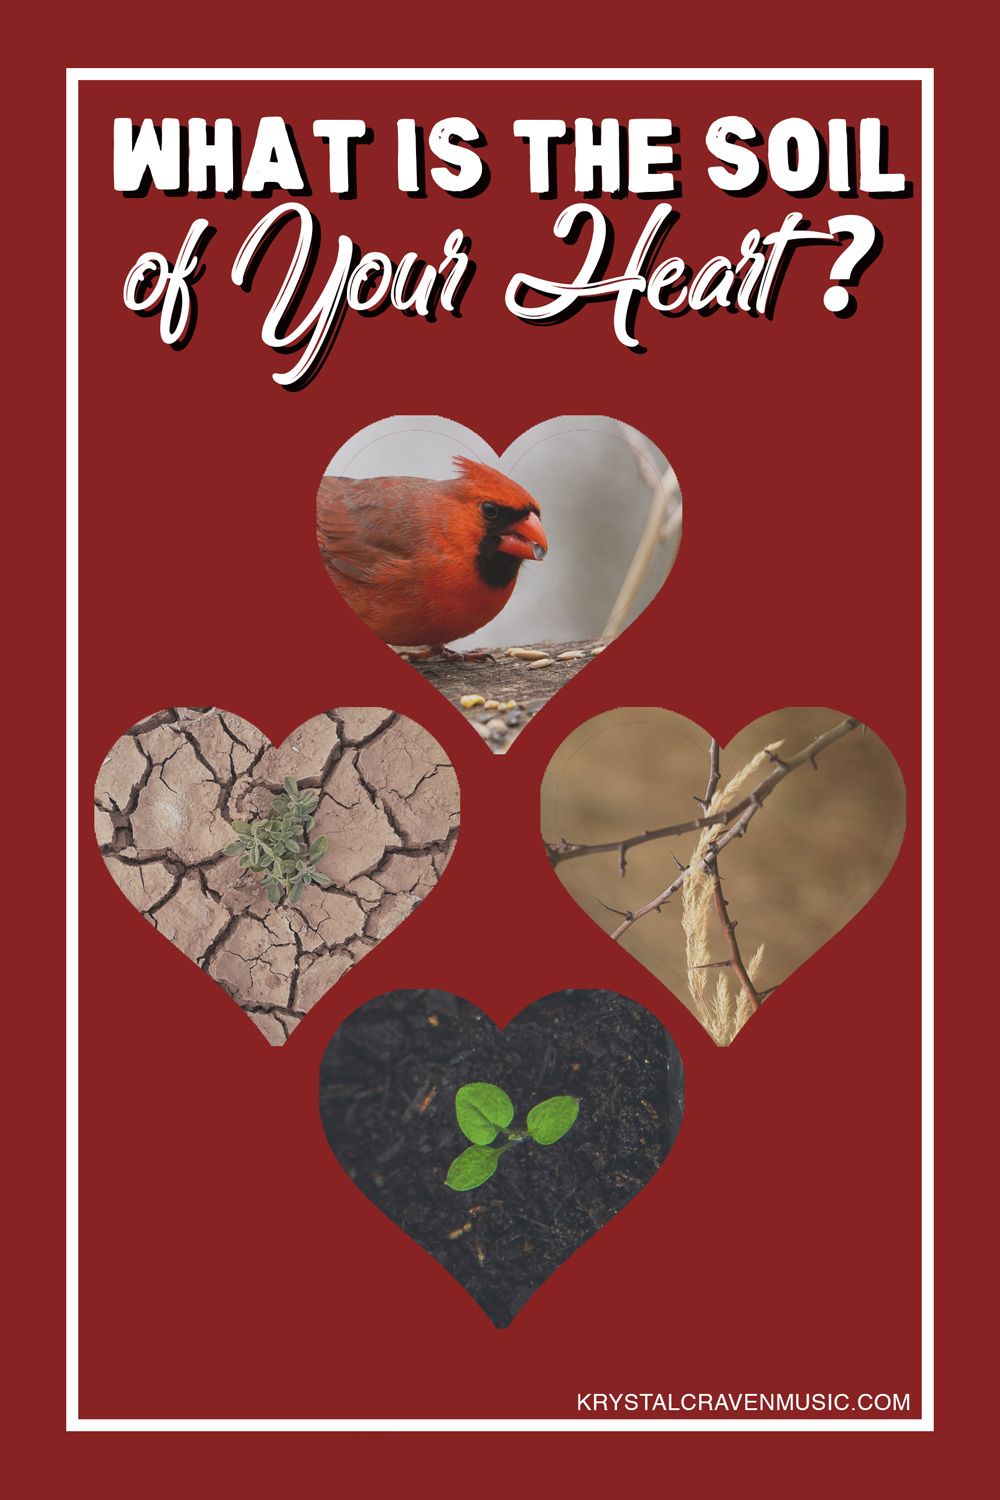 The text of "What is the soil of your heart" overlaying a brick red background with four hearts. In the first heart is a bird eating a seed. In the second heart is a rocky ground with a dying plant growing out of it. In the third heart is wheat growing through thorns. In the fourth heart is a dark, rich soil with a green seedling growing in it.